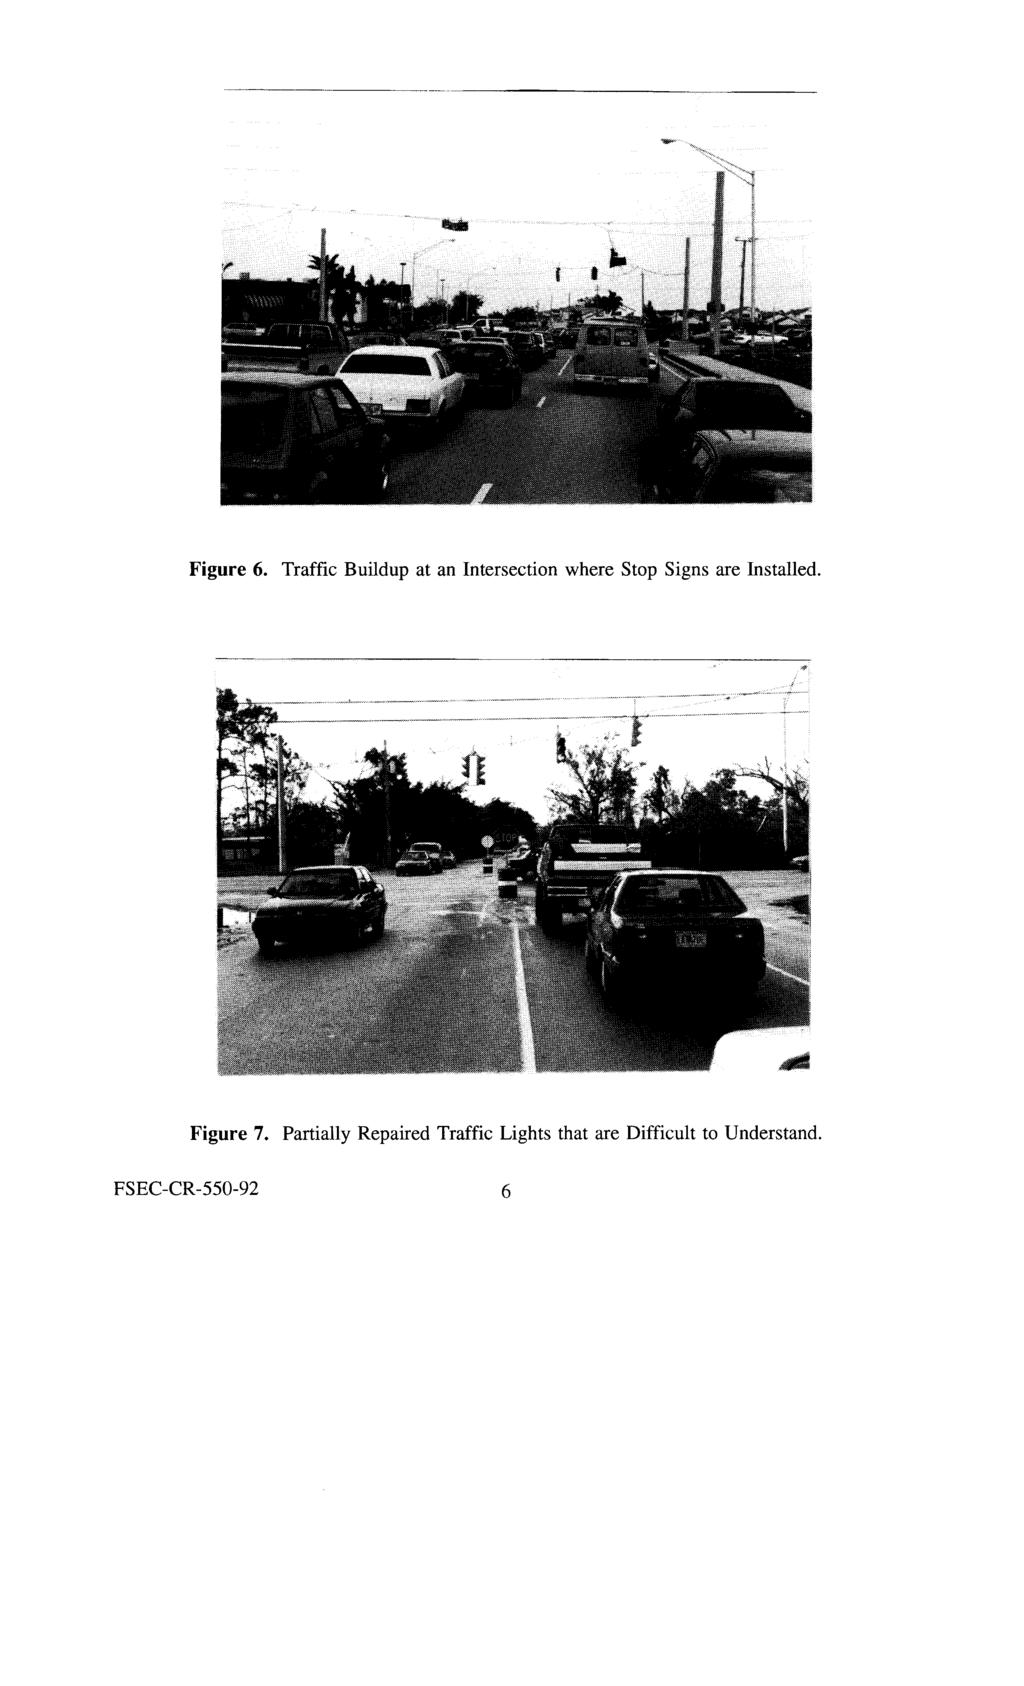 - -- Figure 6. Traffic Buildup at an Intersection where Stop Signs are Installed.